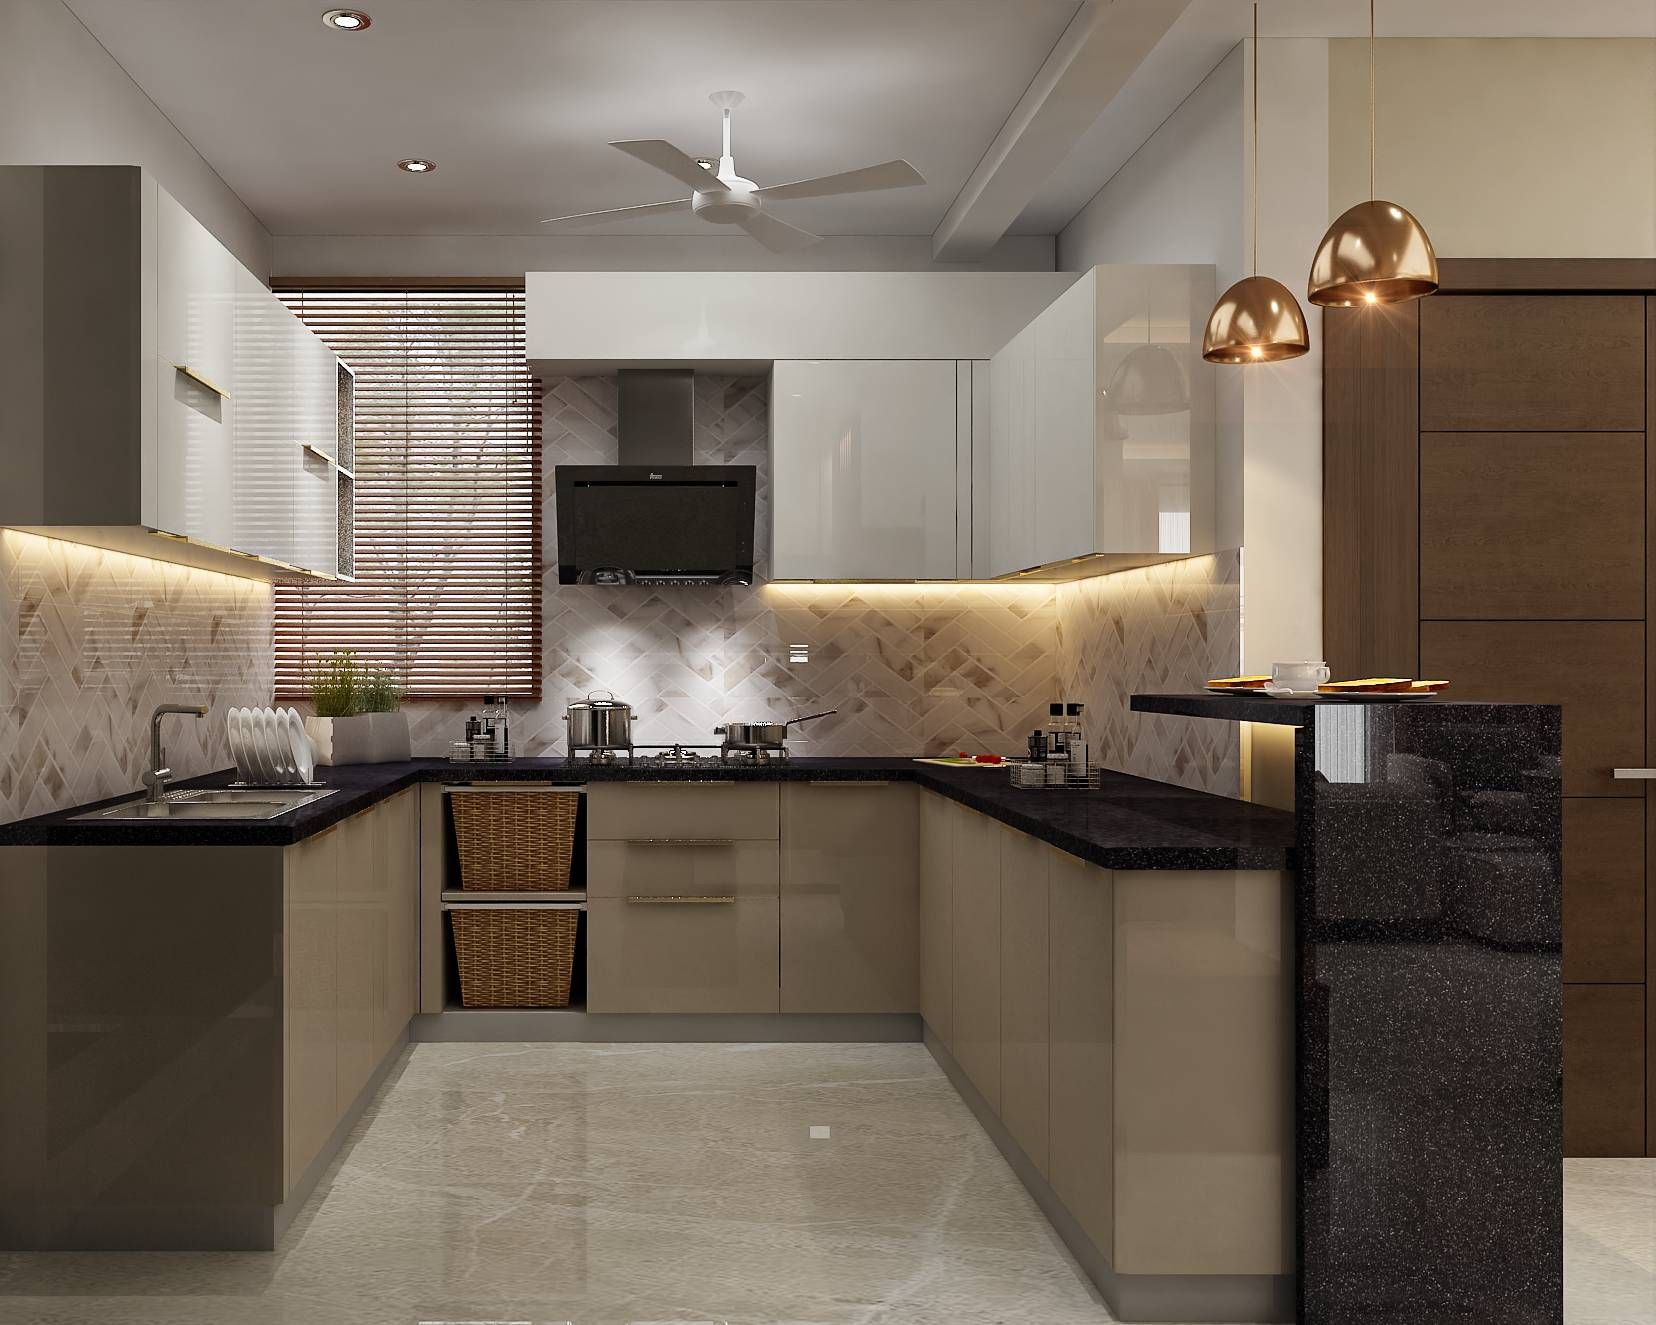 Modern U-Shaped Kitchen Design With Cove Lighting And Hanging Lights